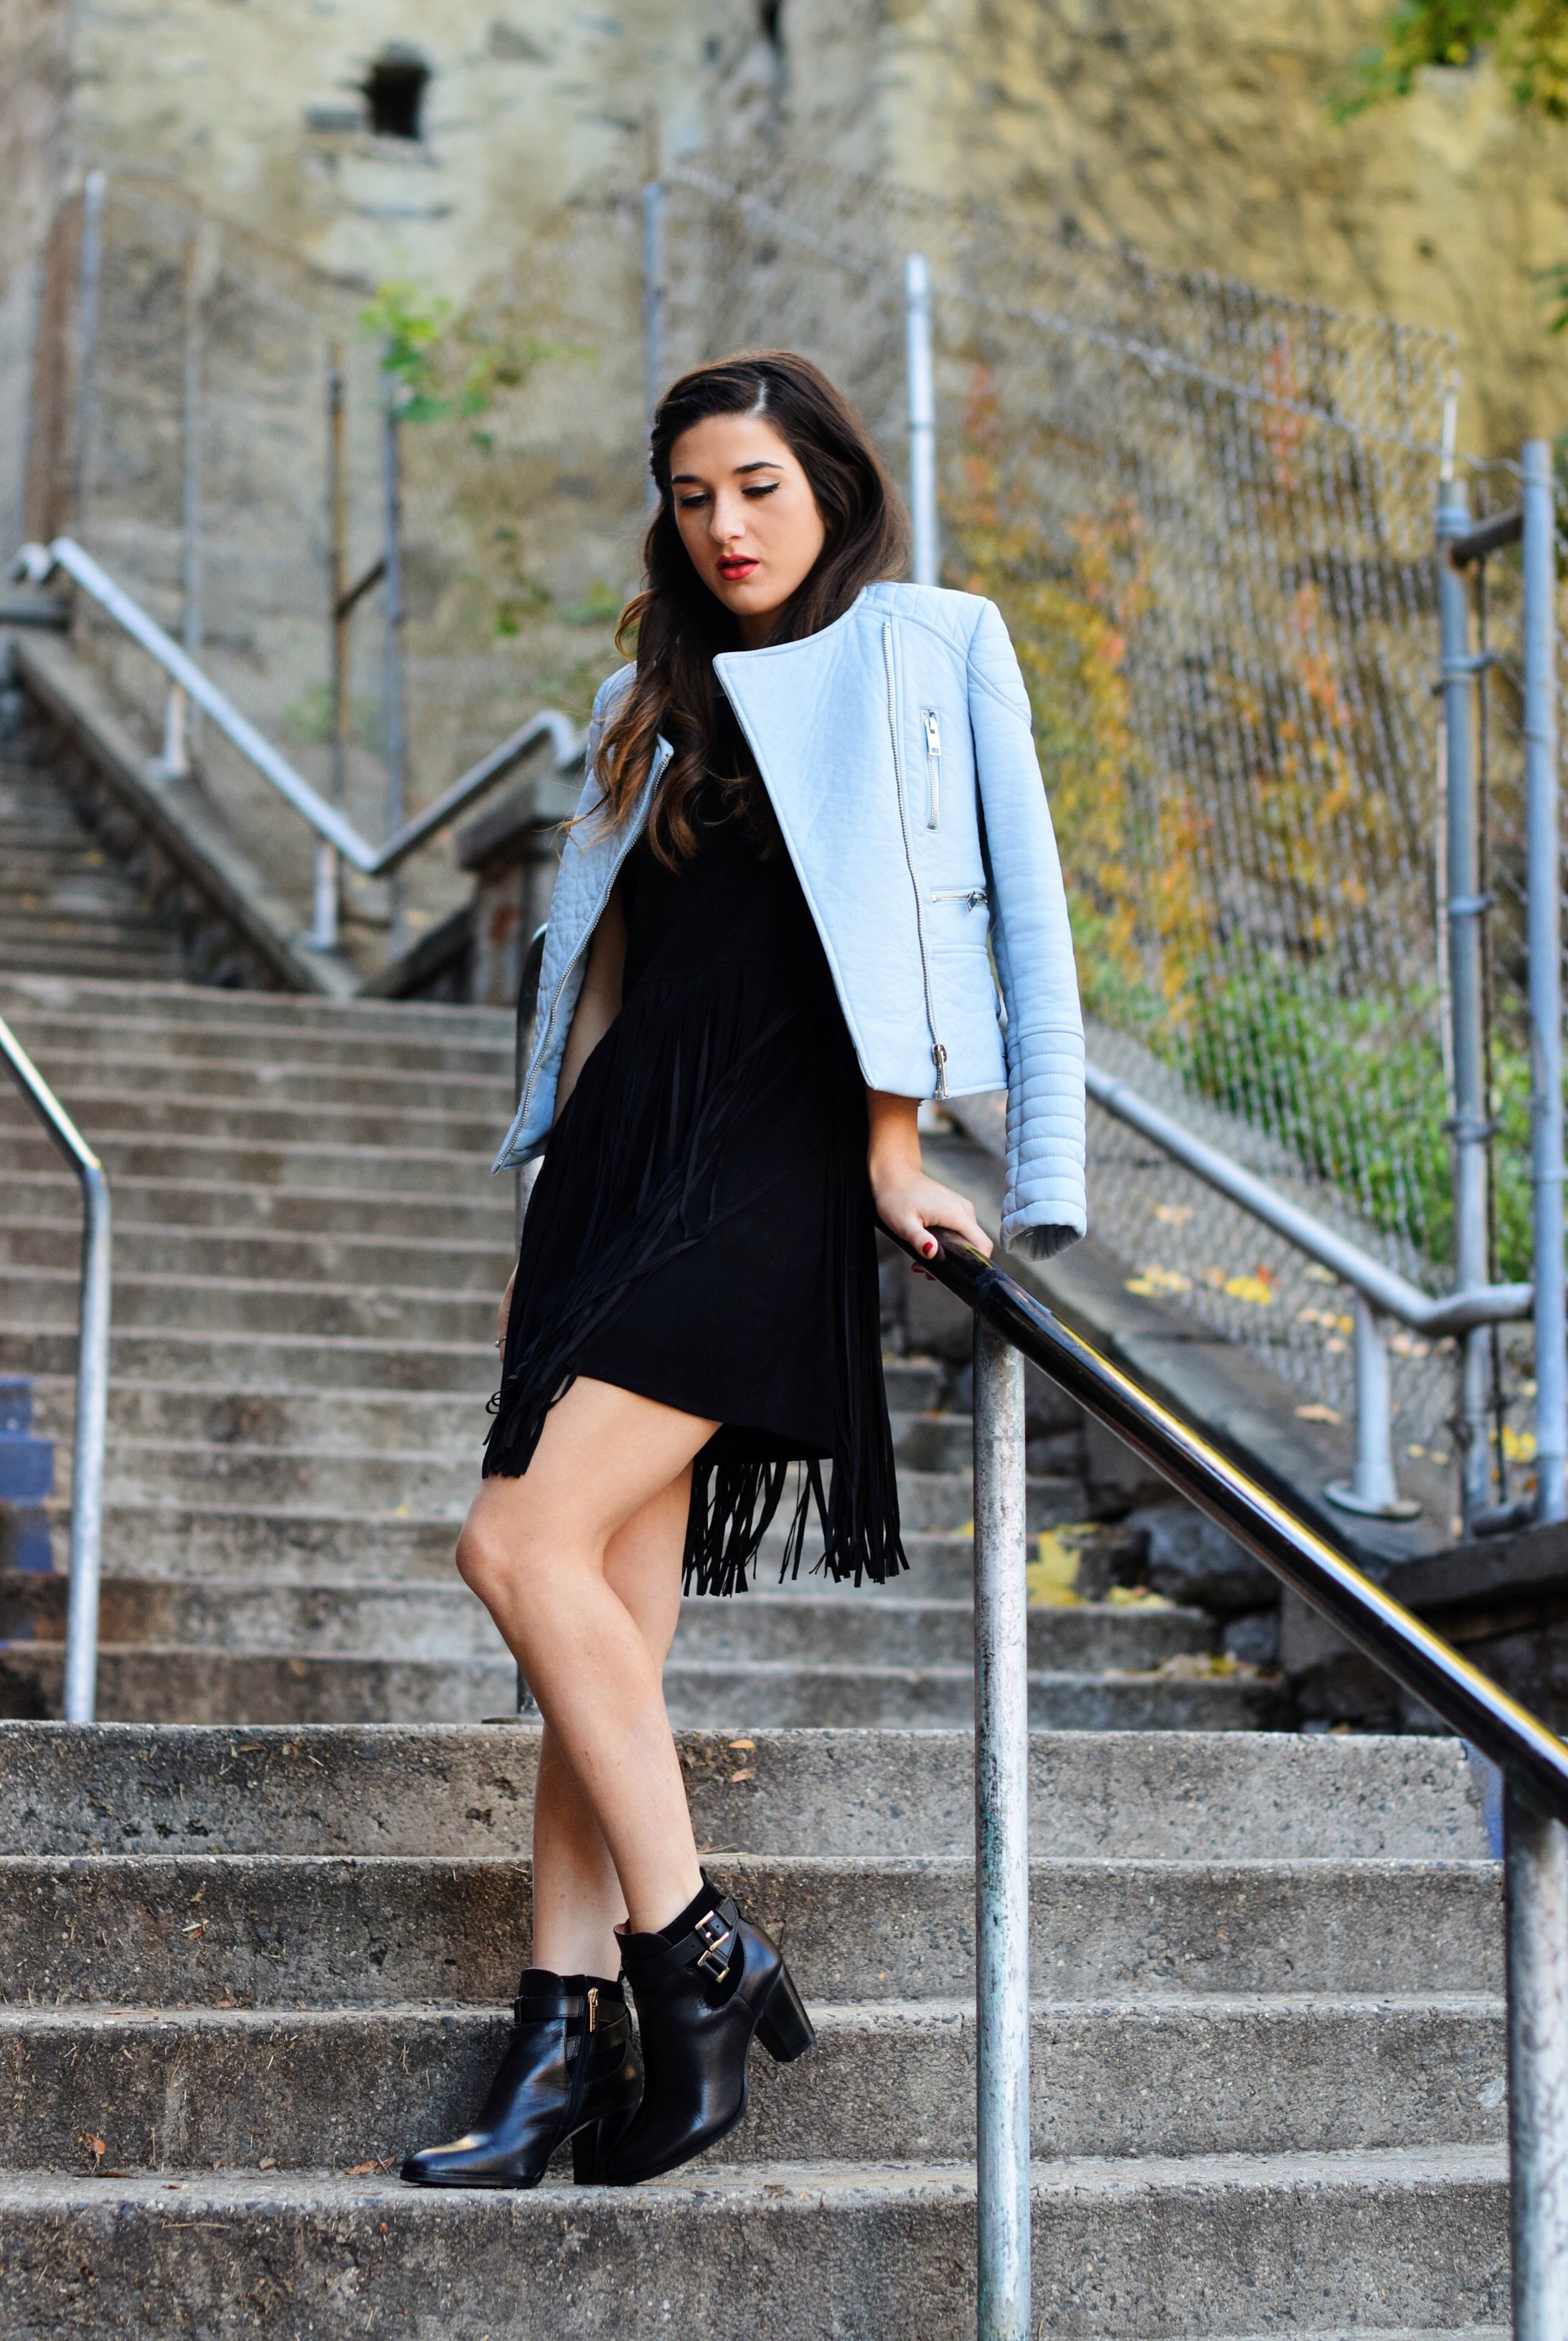 Black Fringe Dress Trèscool Louboutins & Love Fashion Blog Esther Santer NYC Street Style Blogger Baby Blue Leather Jacket Zara Hair Girl Model Photoshoot Booties Nordstrom Outfit OOTD Red Nail Polish Shop Pretty  Fall Look Shoes Winter Trendy Inspo .jpg